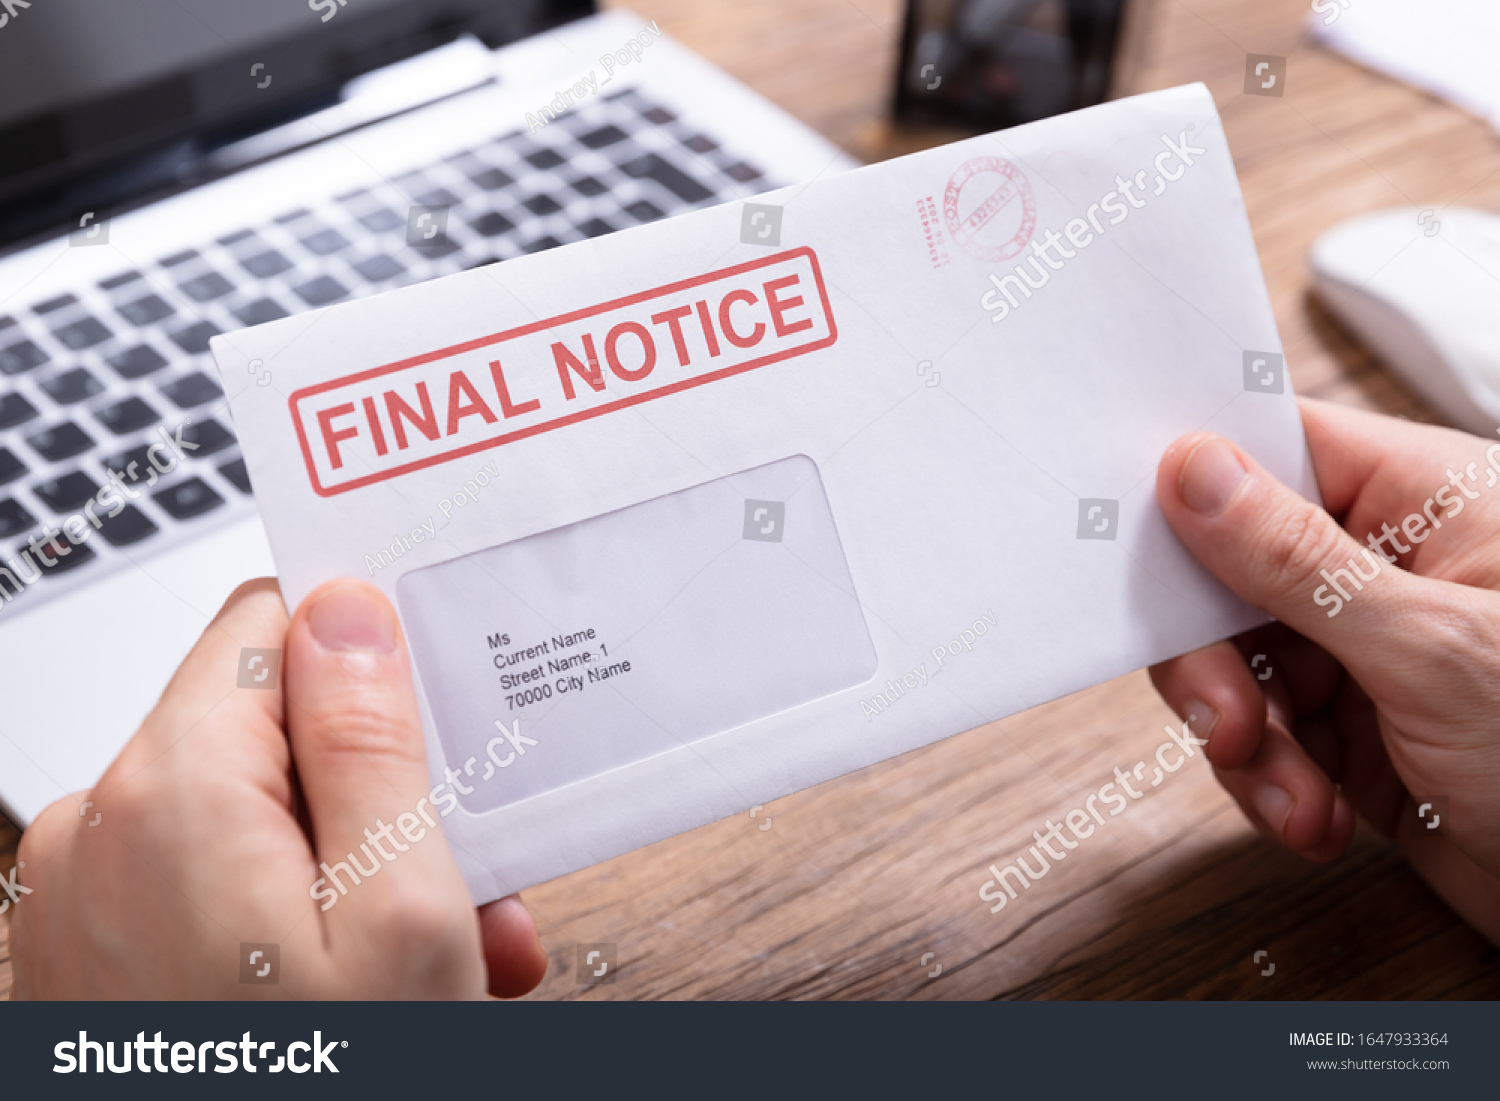 Close-up Of Person's Hand Holding Final Notice Envelope #1647933364